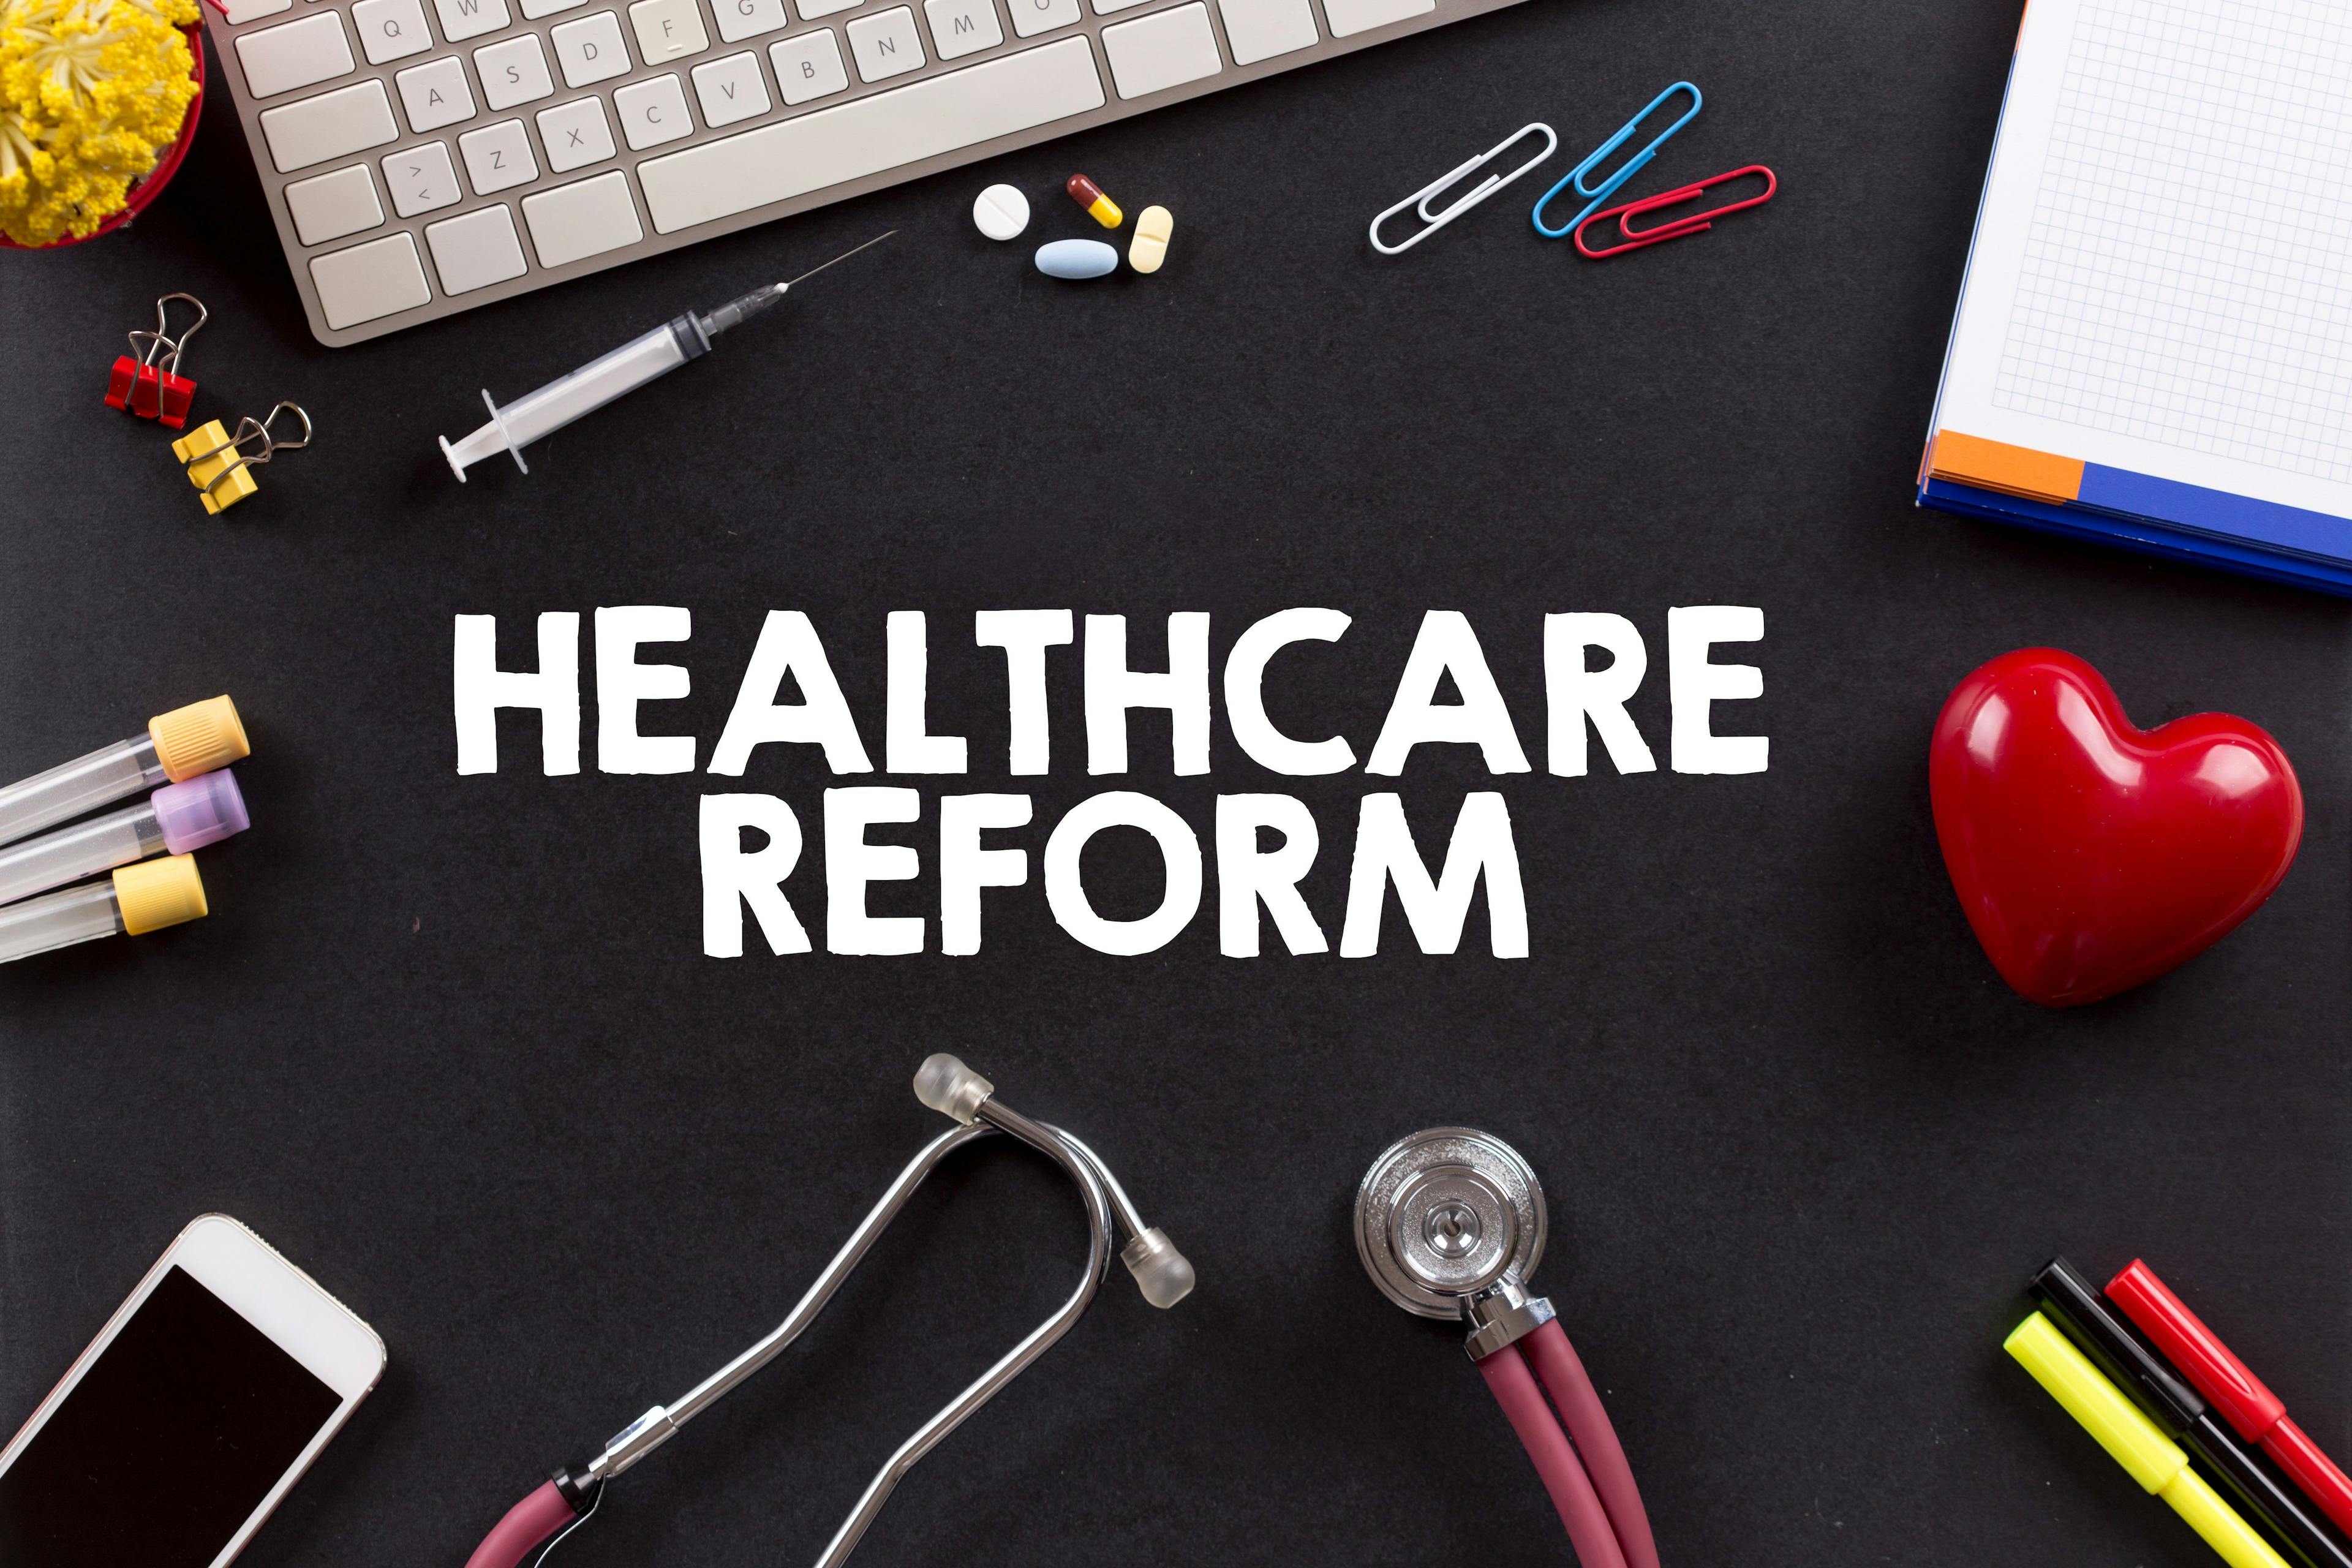 ACP calls for U.S. healthcare reform, endorses single-payer or robust public option 